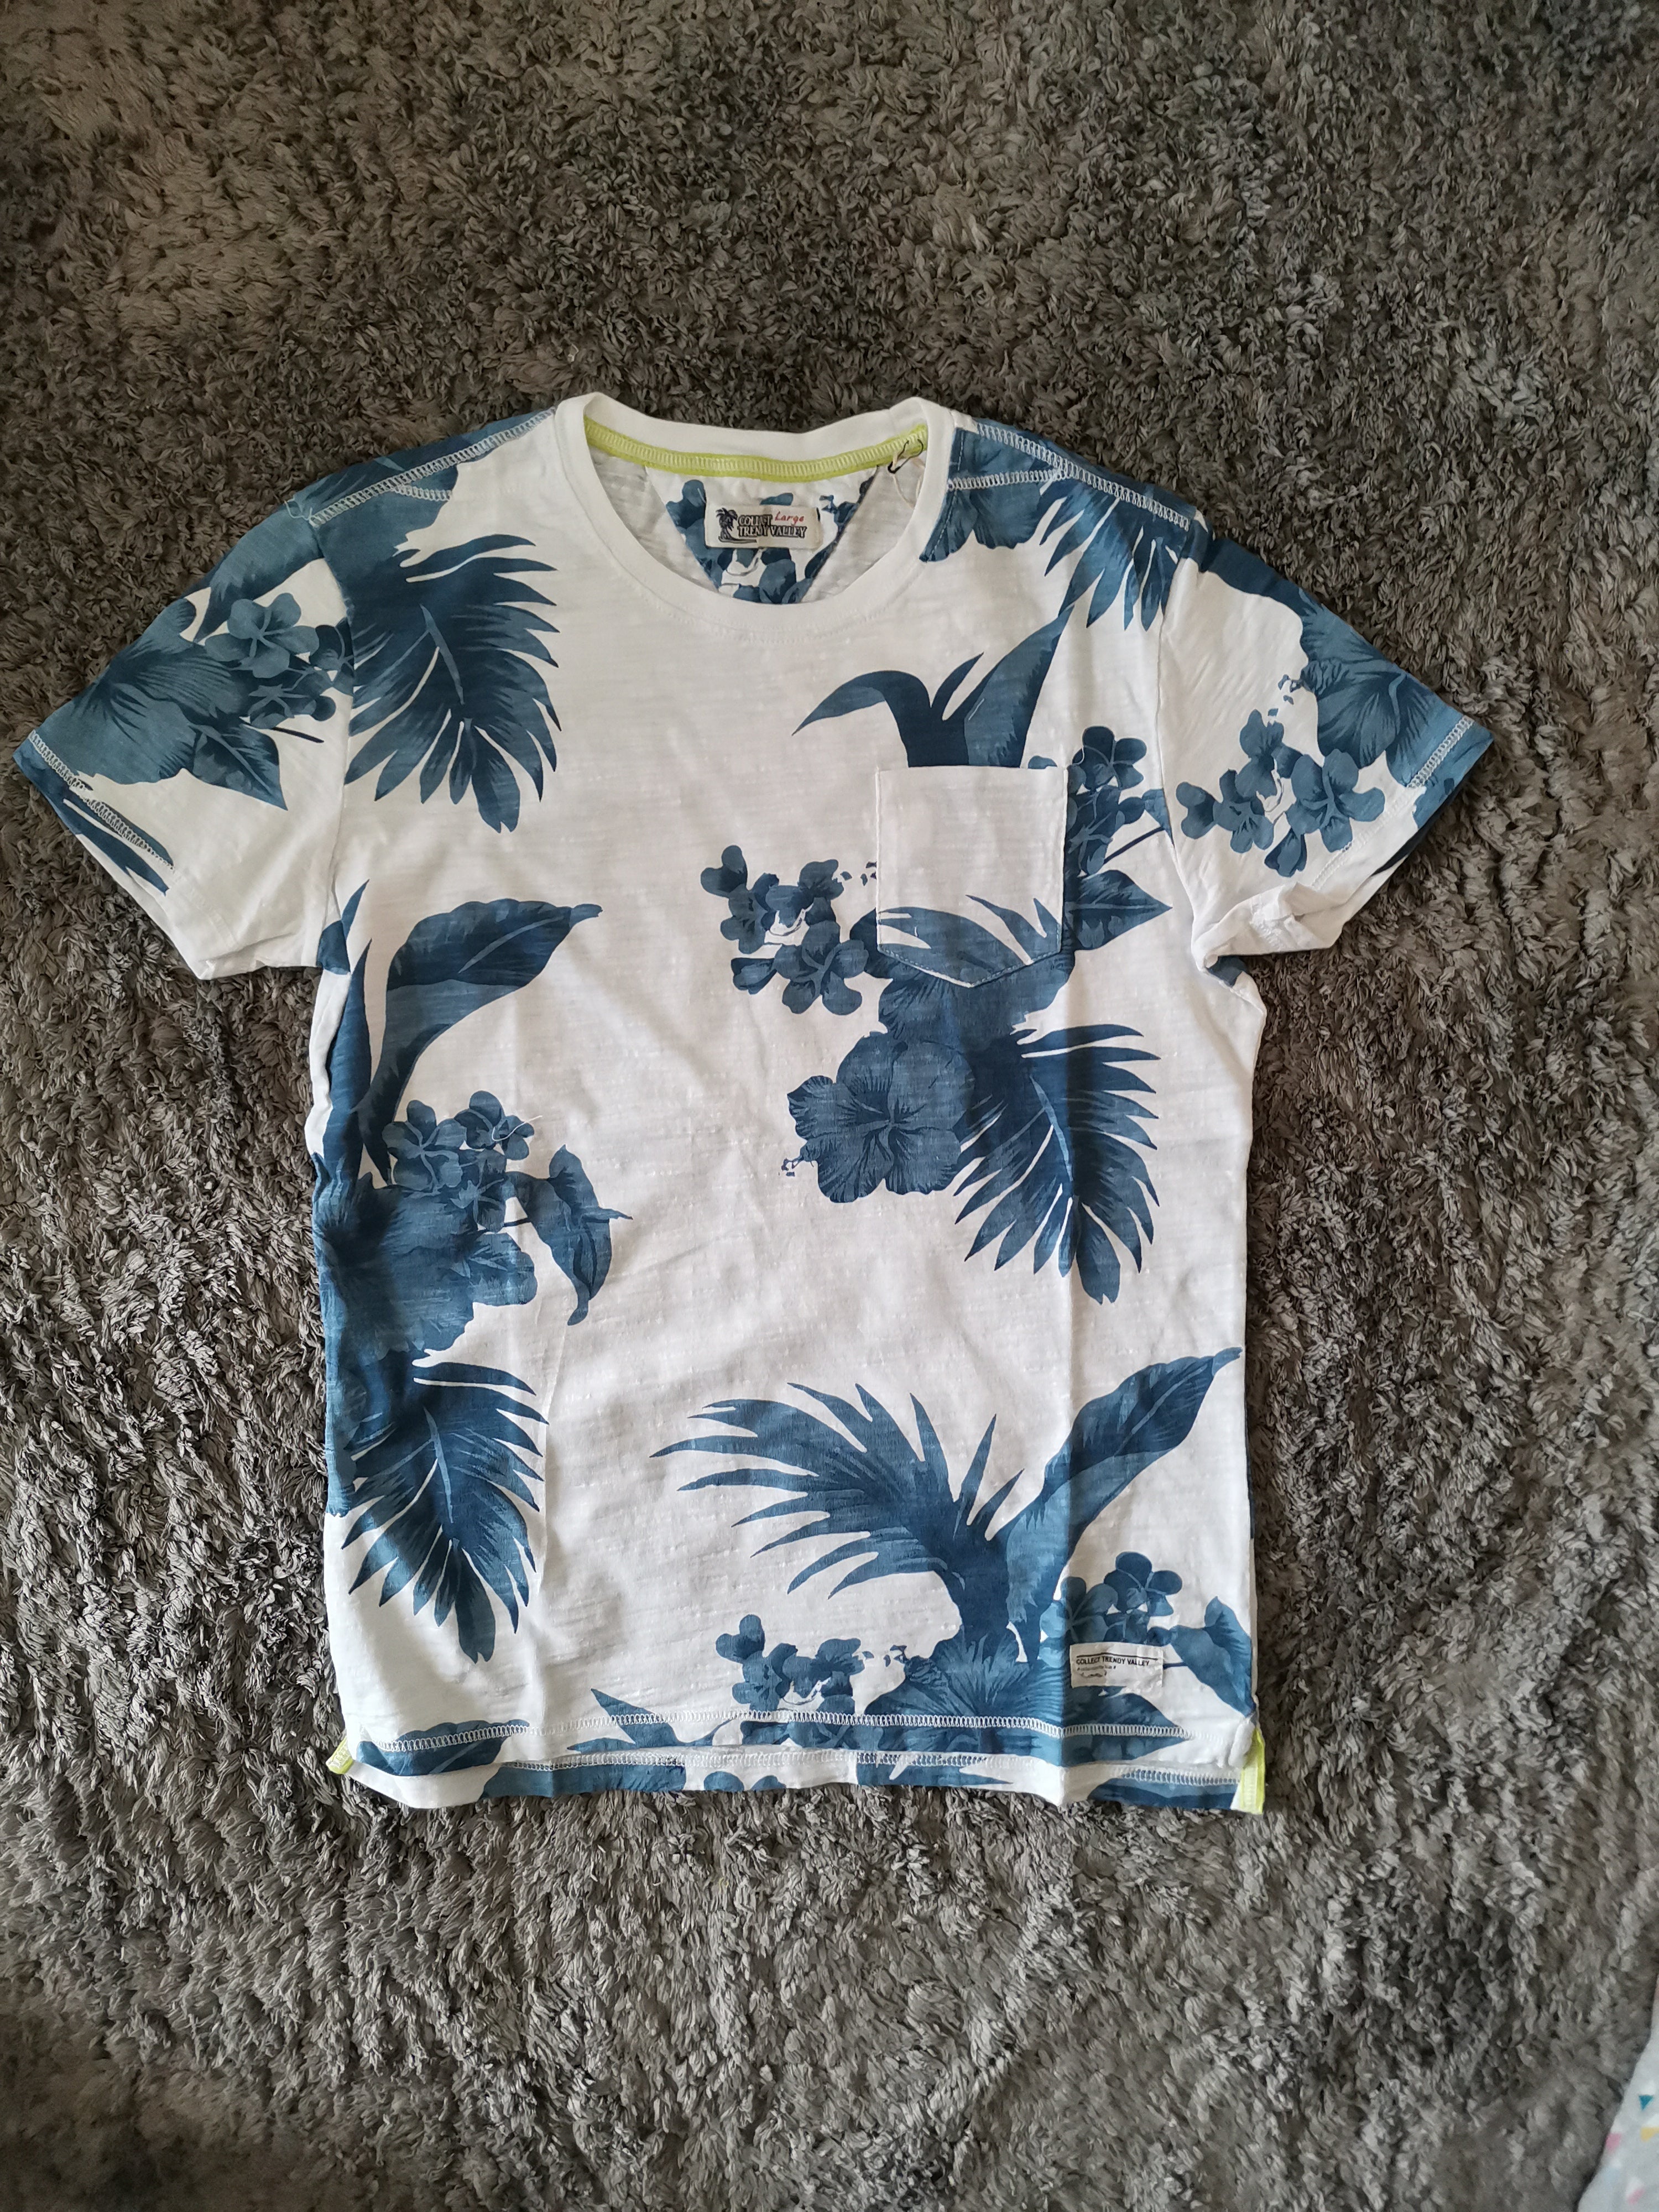 Floral T shirts